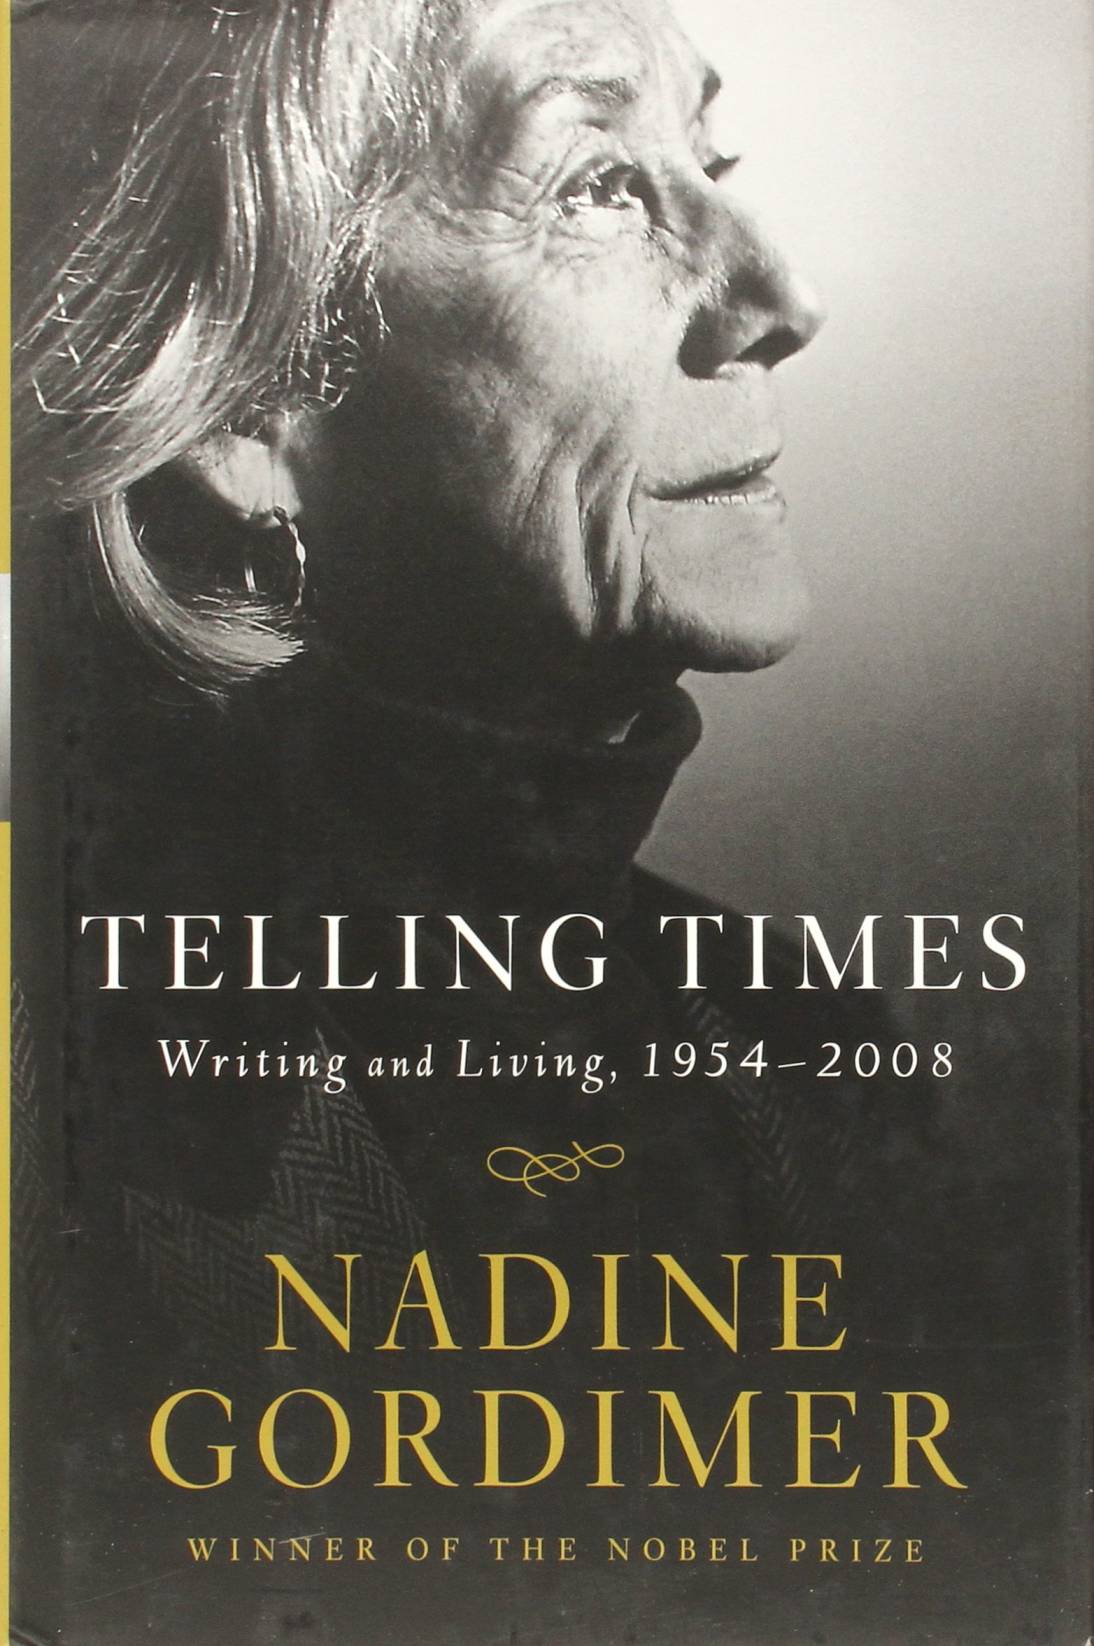 Telling Times a book by Nadine Gordimer. Also winner of the Nobel prize. 